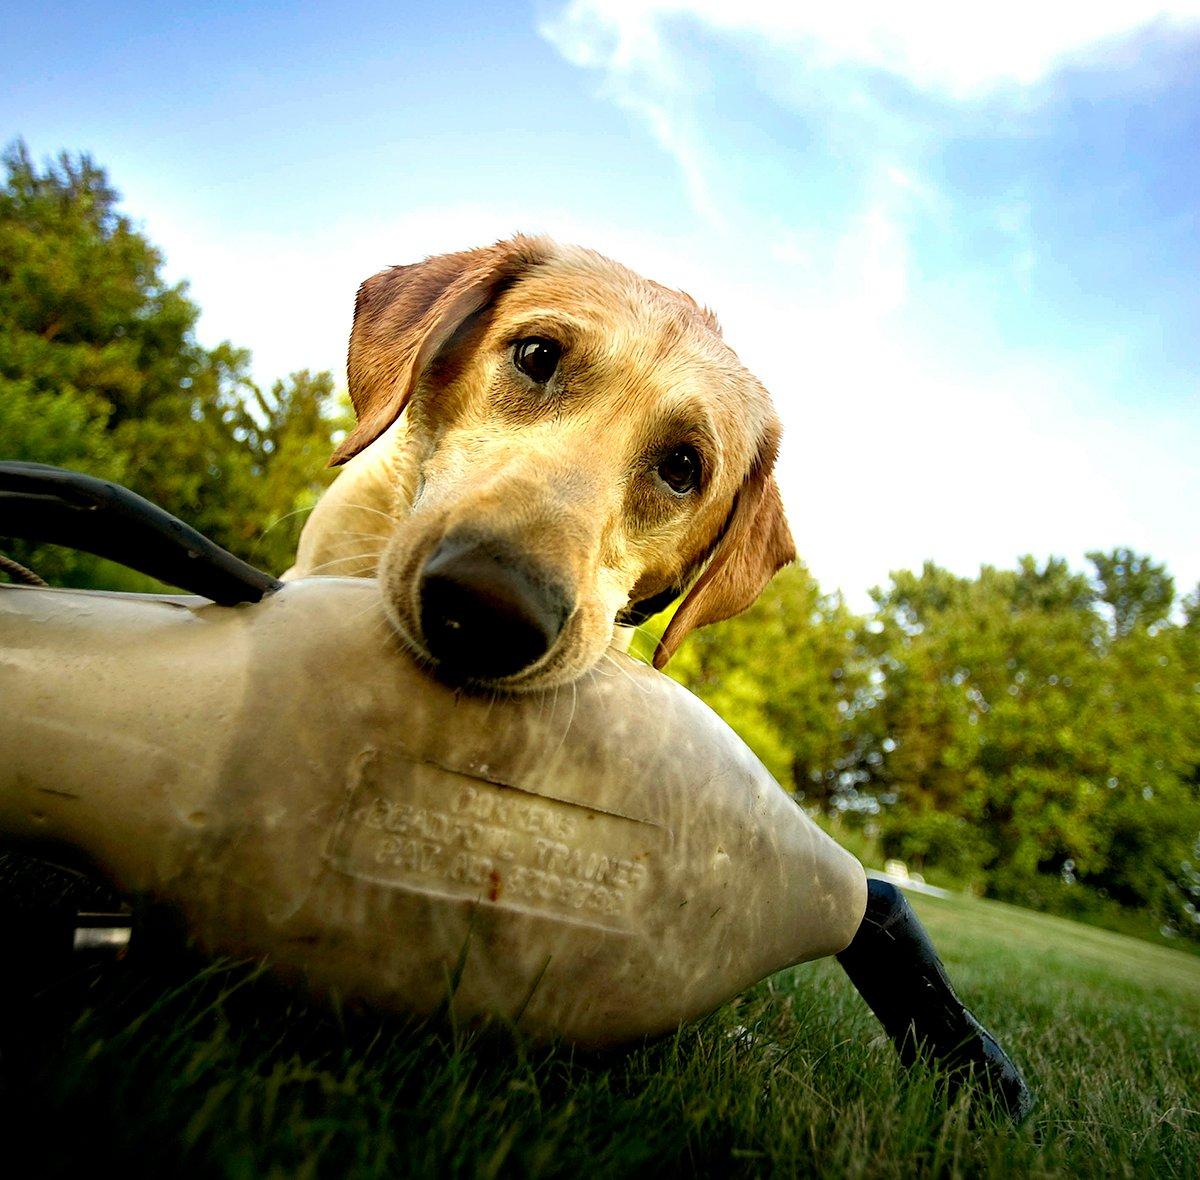 Are you way too excited for the 2016 duck and goose seasons? Maybe even your retriever has noticed. Photo © Bill Konway